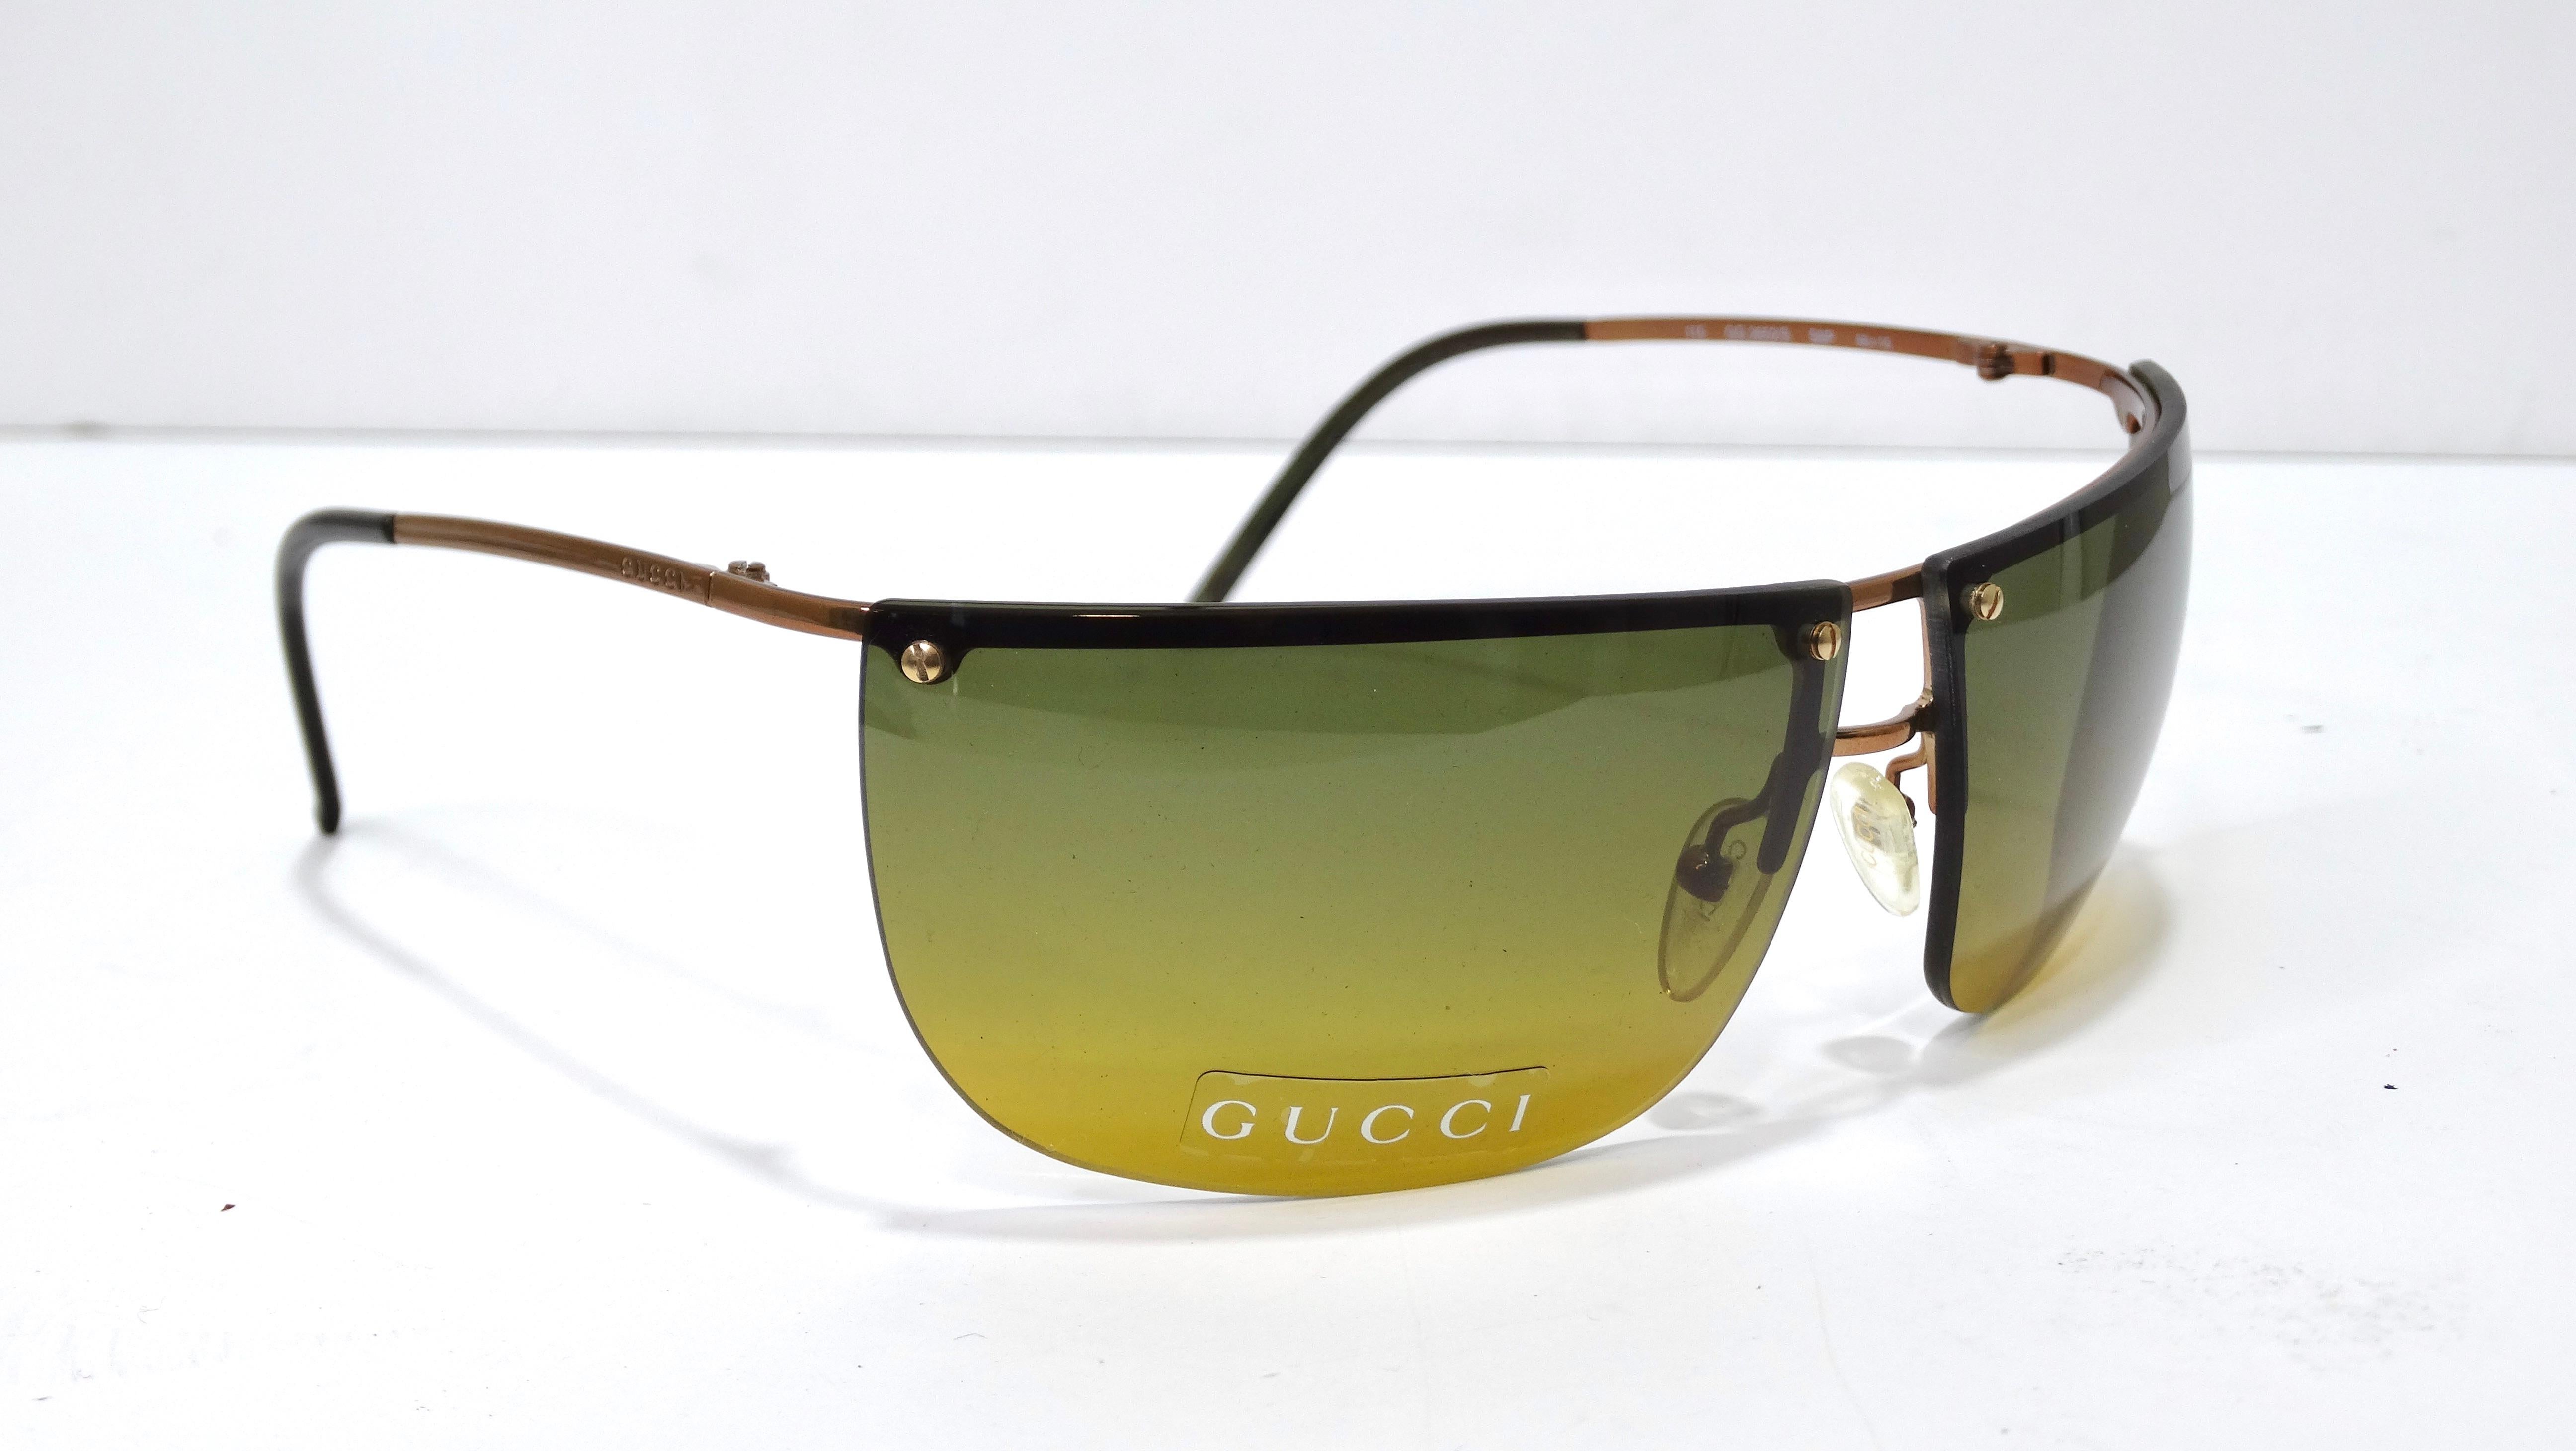 Vintage Gucci at it's best! Get a piece of the iconic fashion house with these deadstock sunglasses.  Adding the right accessories to an outfit can really take it from zero to hero! Try it out with these cool and edgy sunglasses. Vintage is always